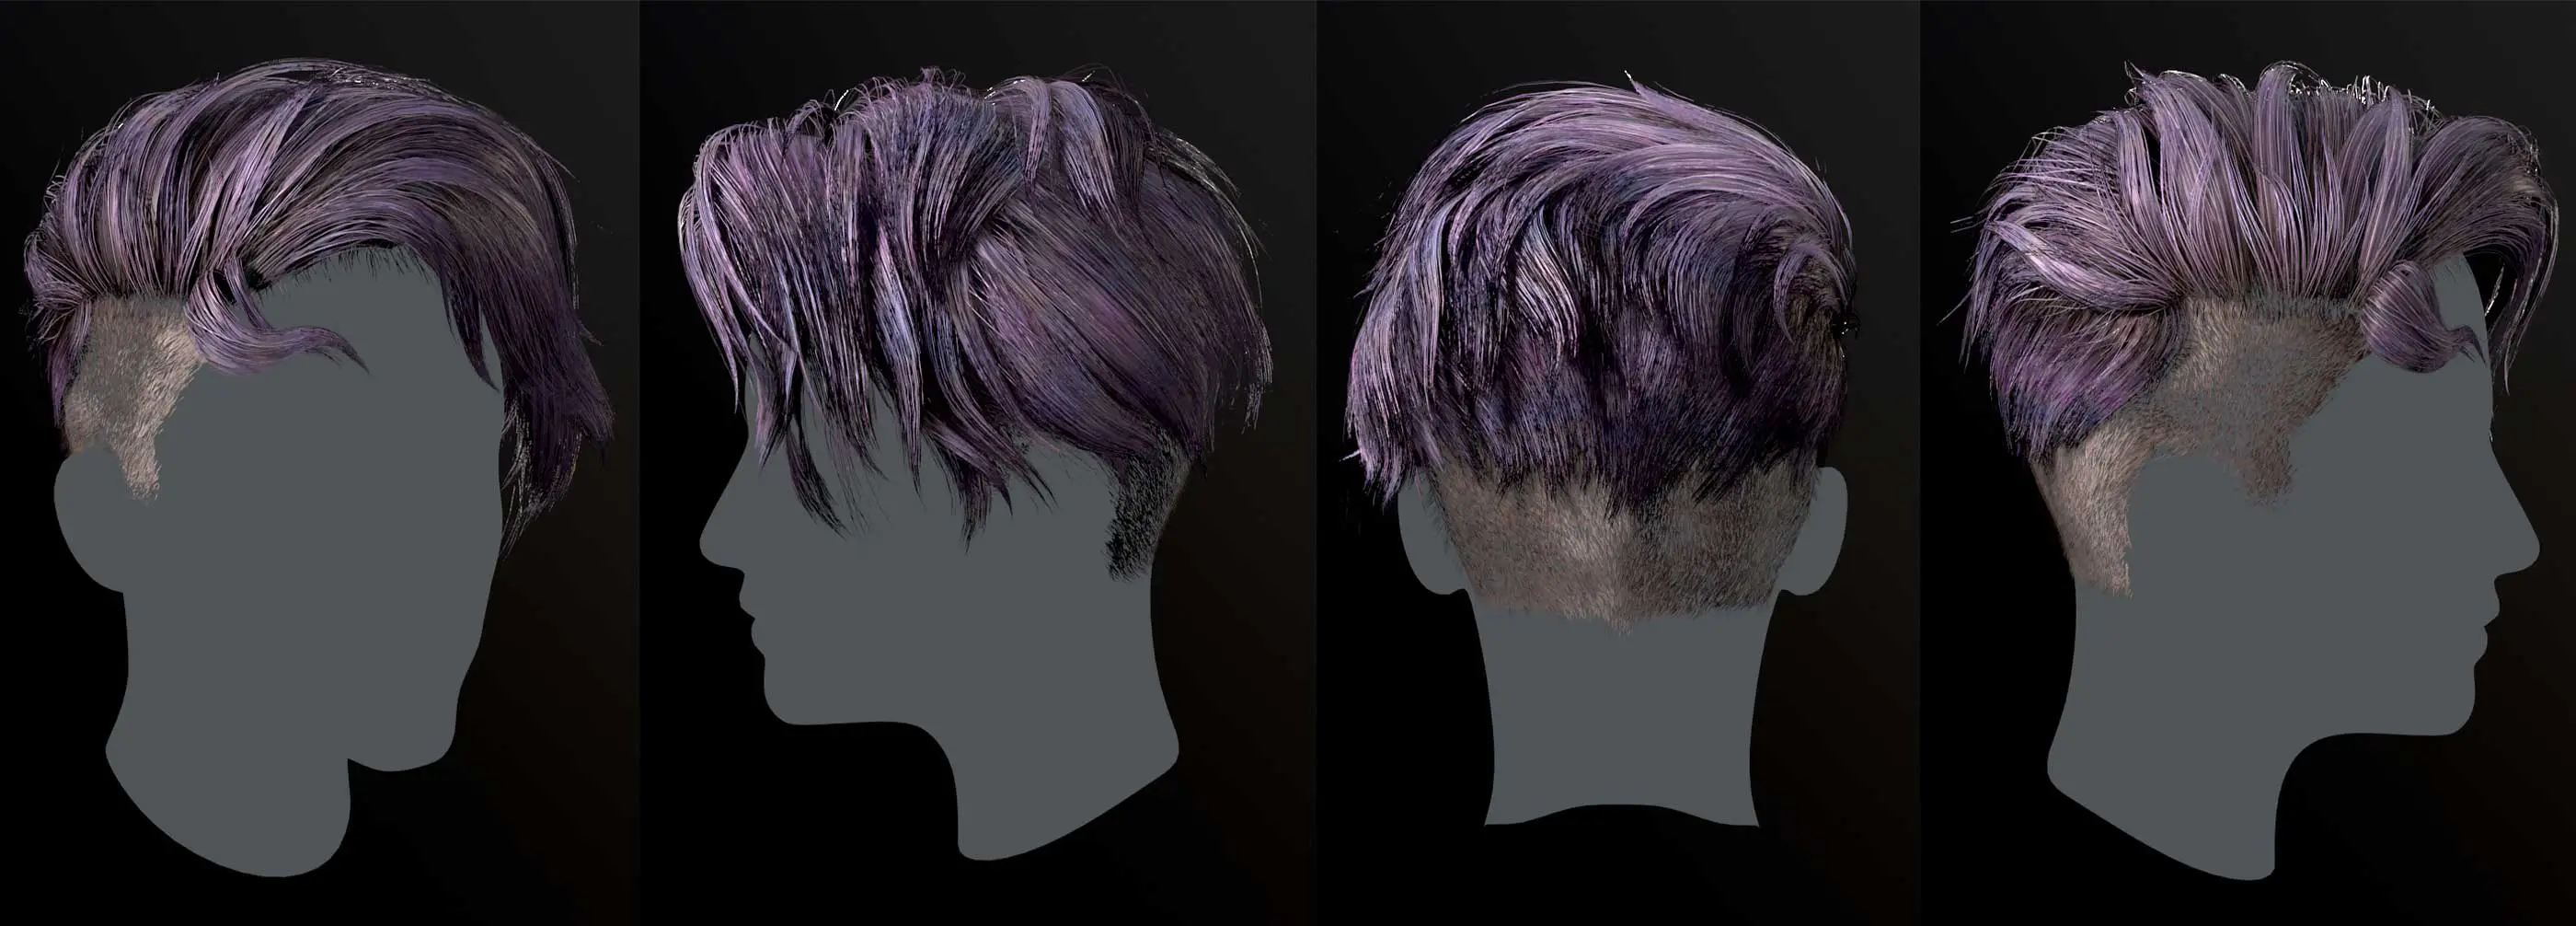 Multiple angles of a short purple hair style.